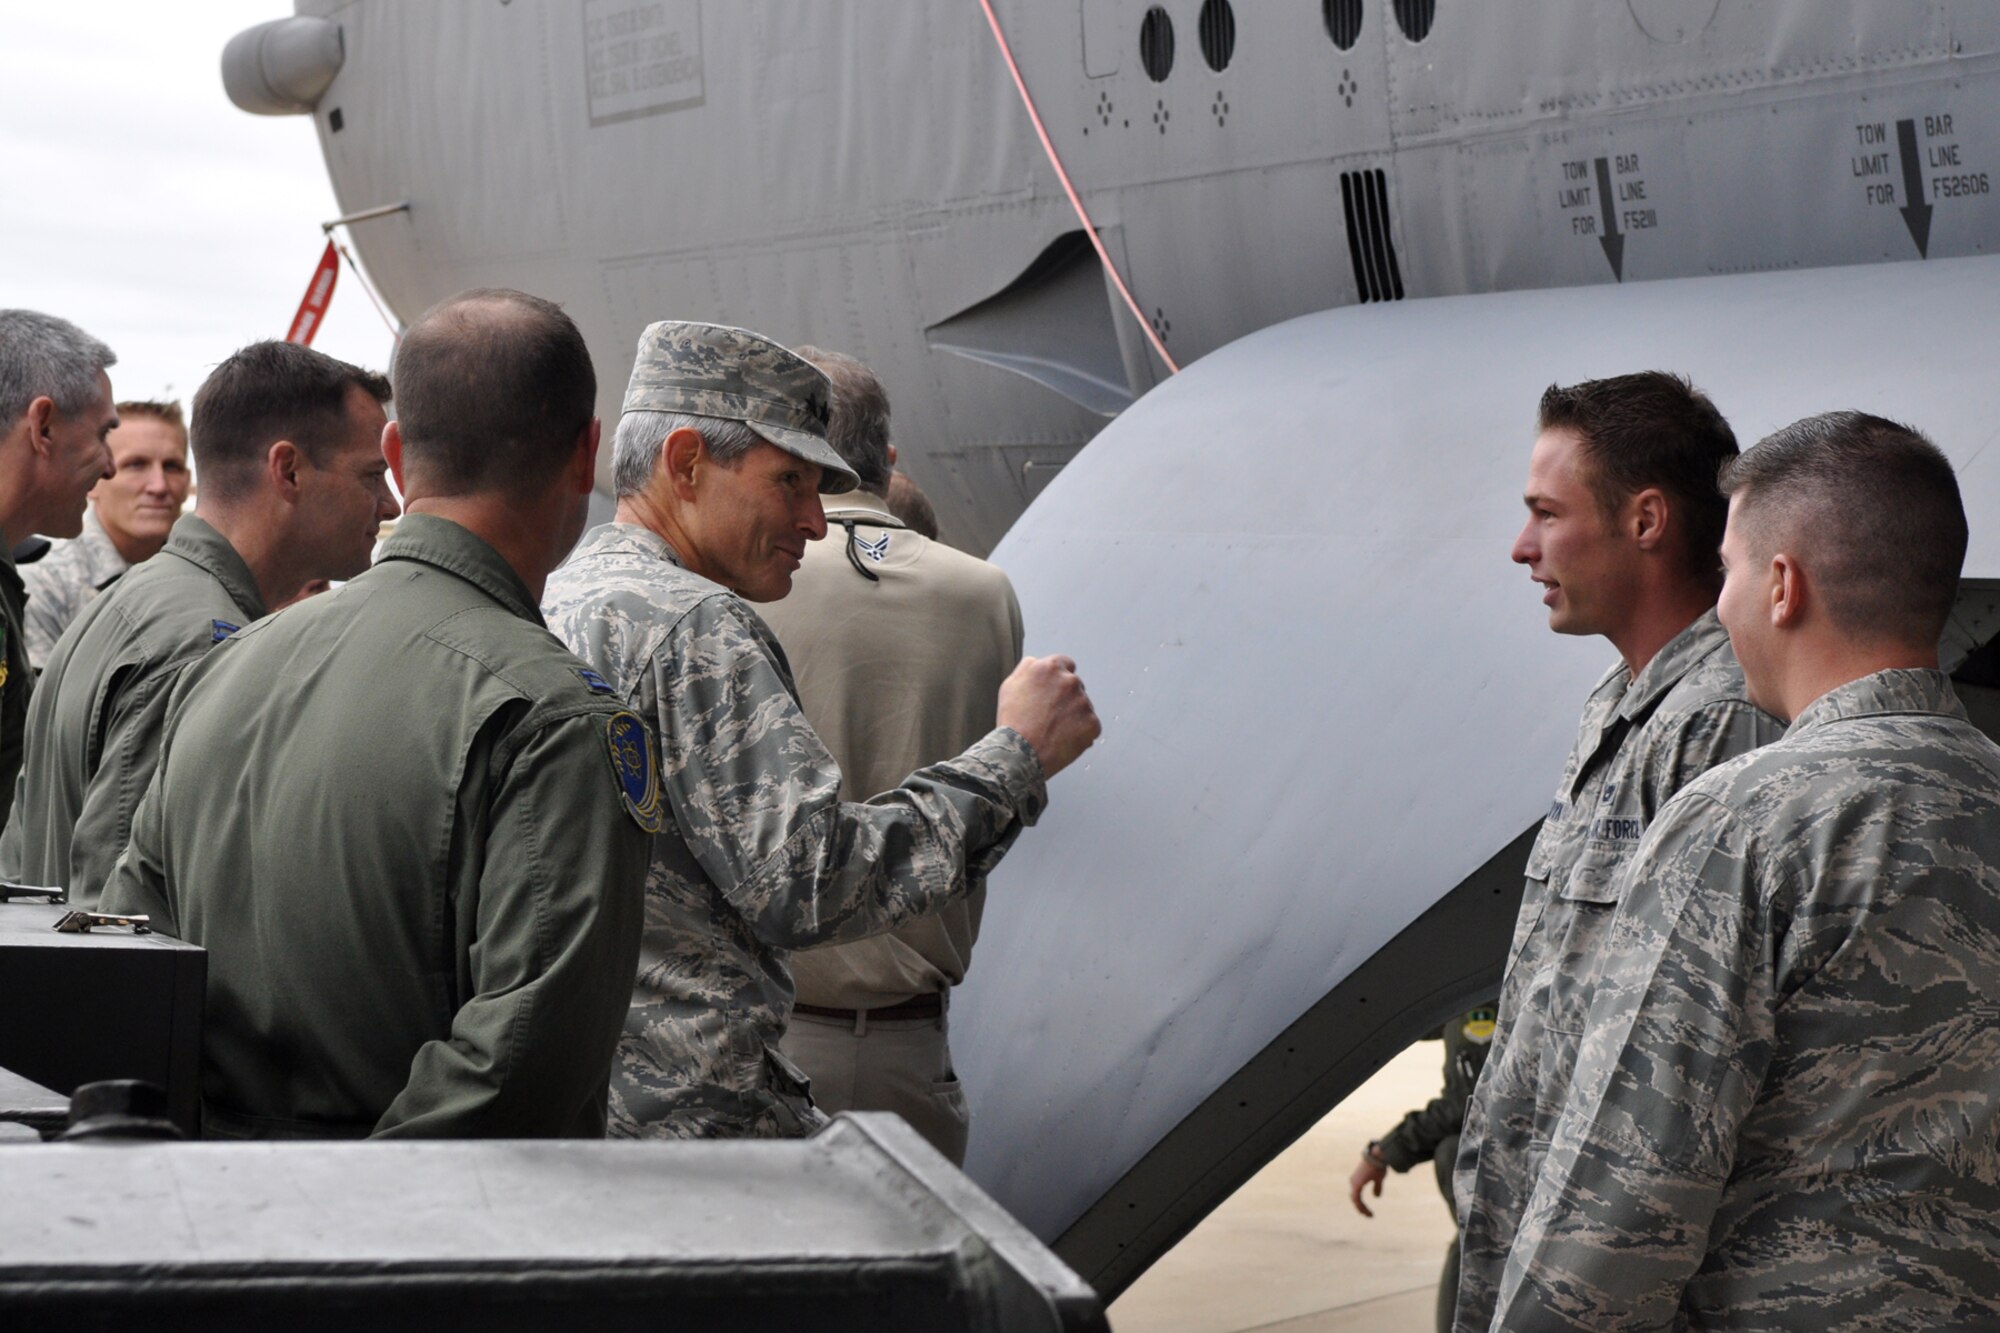 Air Force Chief of Staff Gen. Norton Schwartz says goodbye to several Airmen
from the 307th Bomb Wing, 343rd Bomb Squadron and 2nd Bomb Wing after being
briefed on the B-52 Stratofortress during his visit to Barksdale Air Force
Base, La., Oct. 18, 2011. General Schwartz and 15 civic leaders from across
the country visited Barksdale AFB Oct. 17-21, 2011, as part of the Air Force
Chief of Staff Civic Leader Program. (U.S. Air Force photo/Master Sgt. Jeff
Walston/Released)
